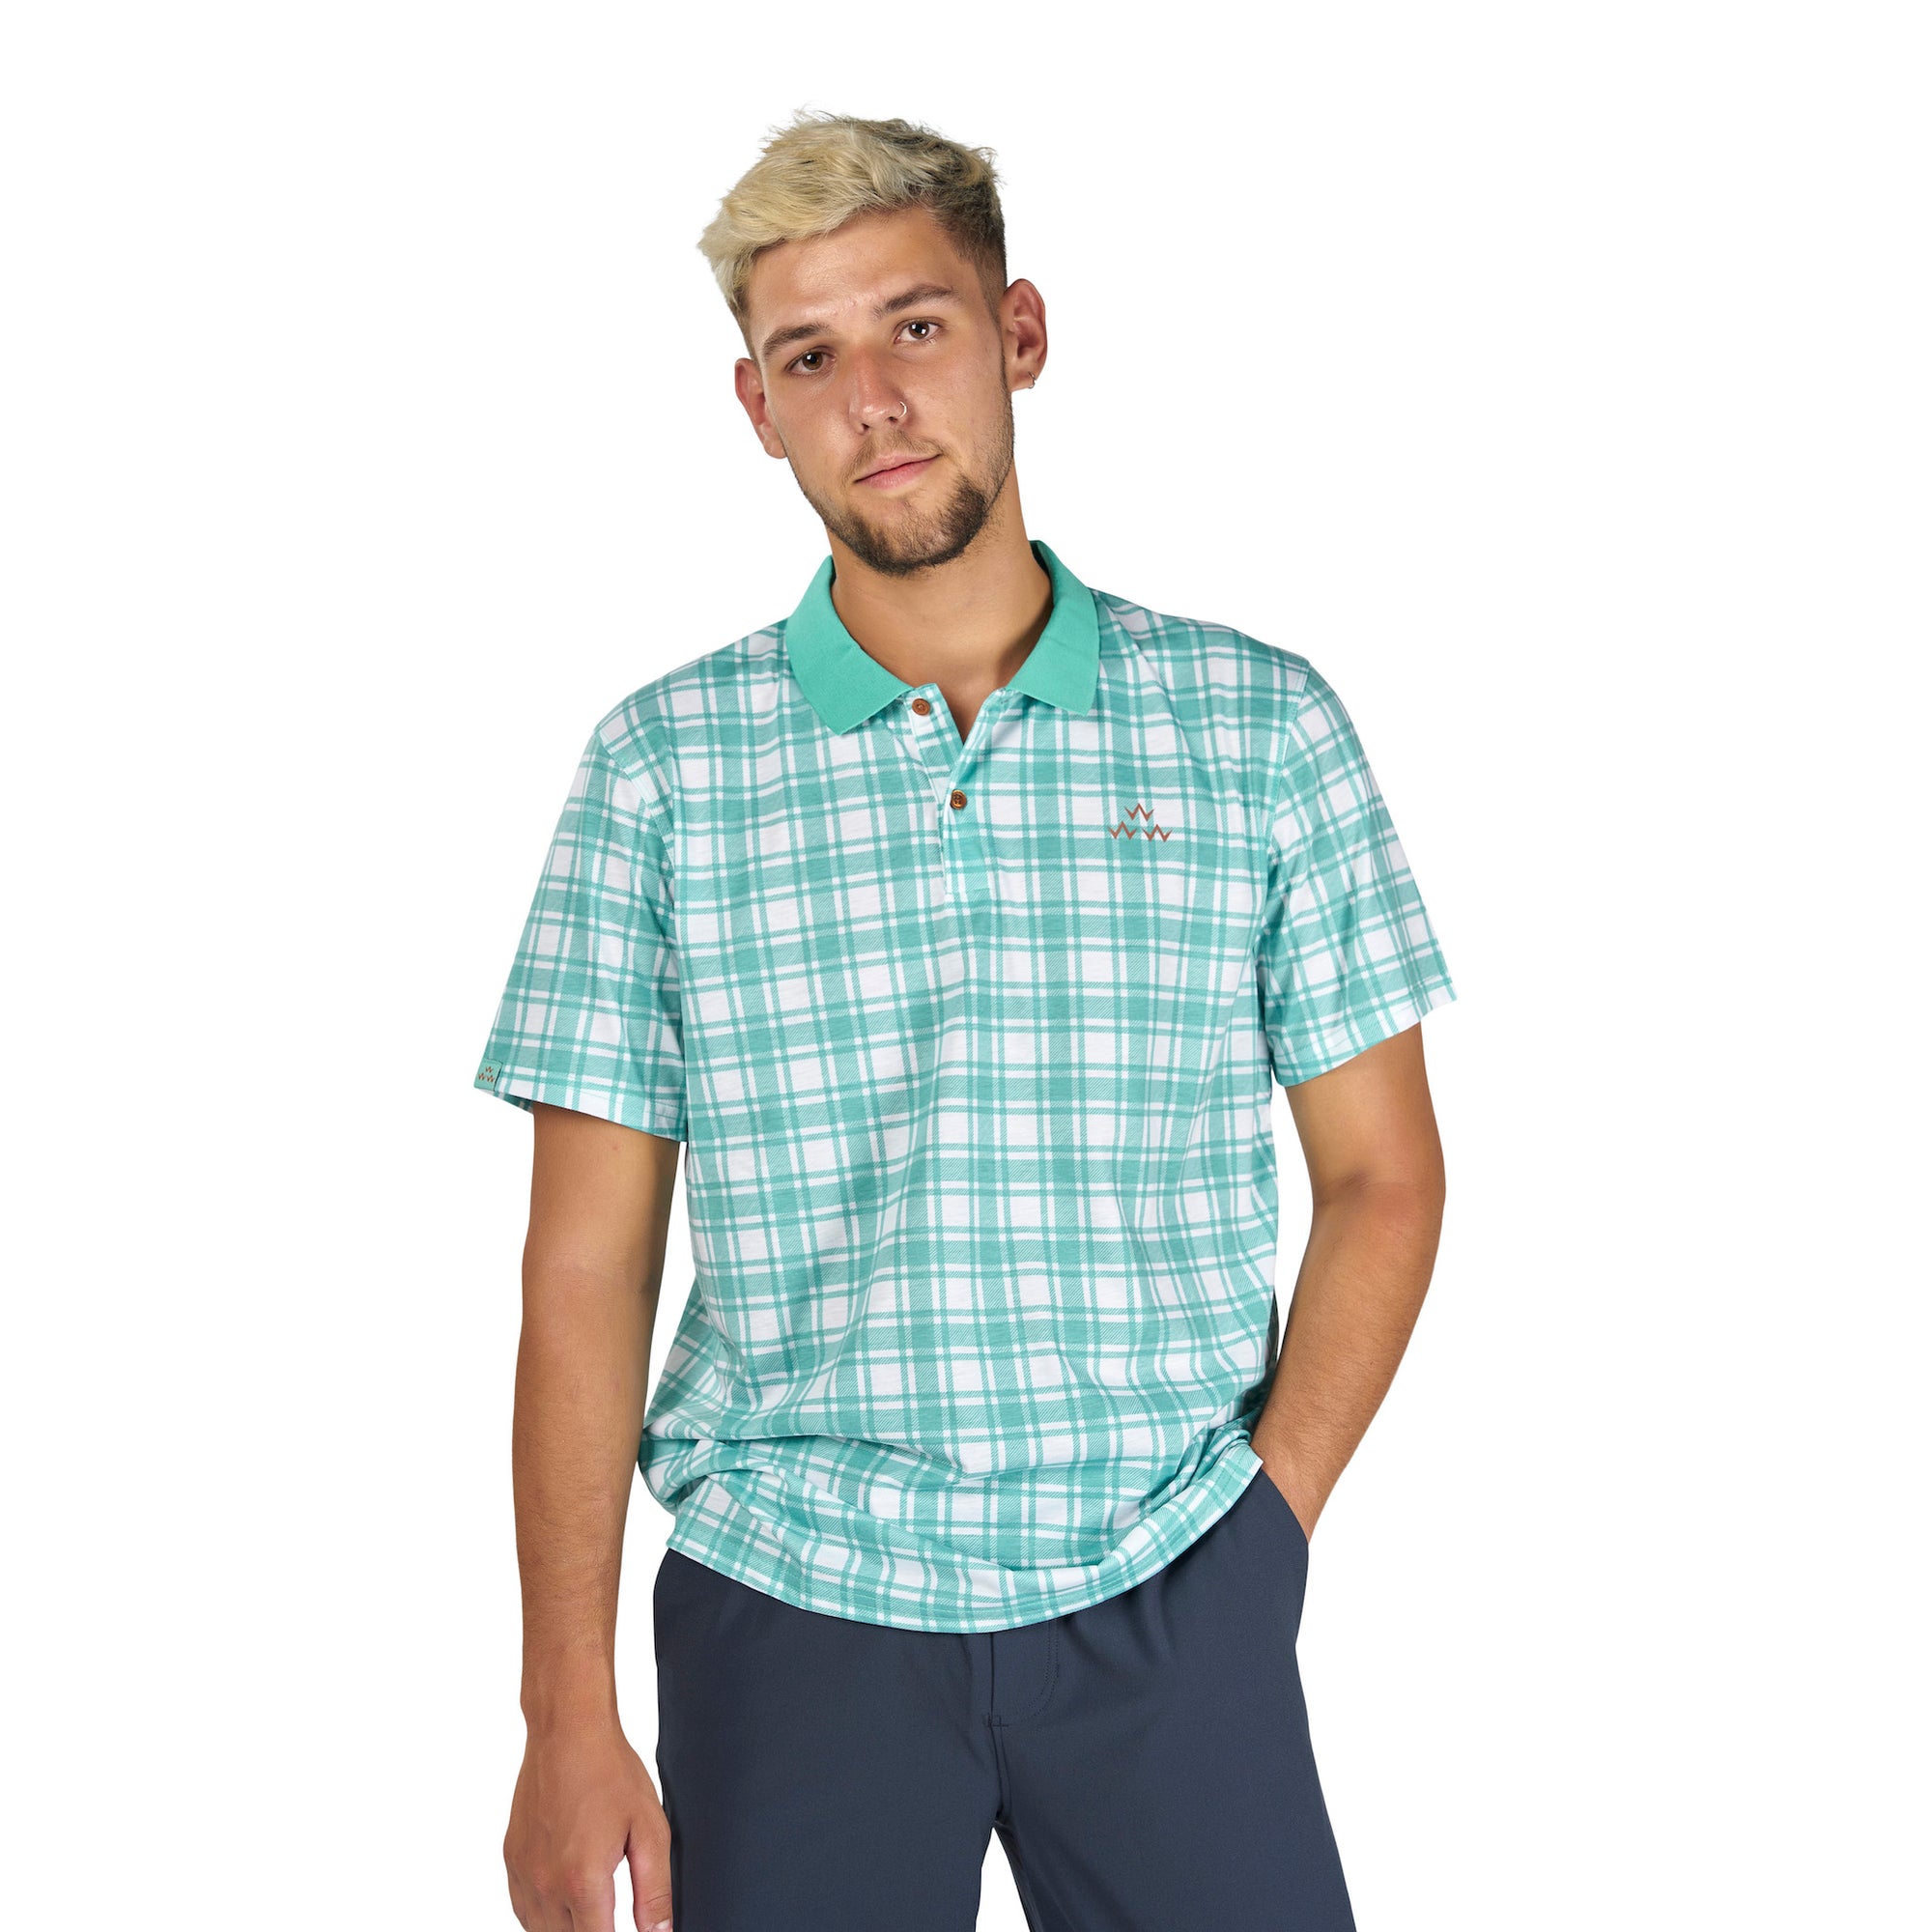 When we say fresh cuts for weekend putts, this is what we are talking about right here.  Made from drirelease fabric this polo performs as good as it looks.  Aqual green plaid on white golf polo by Birds of Condor.